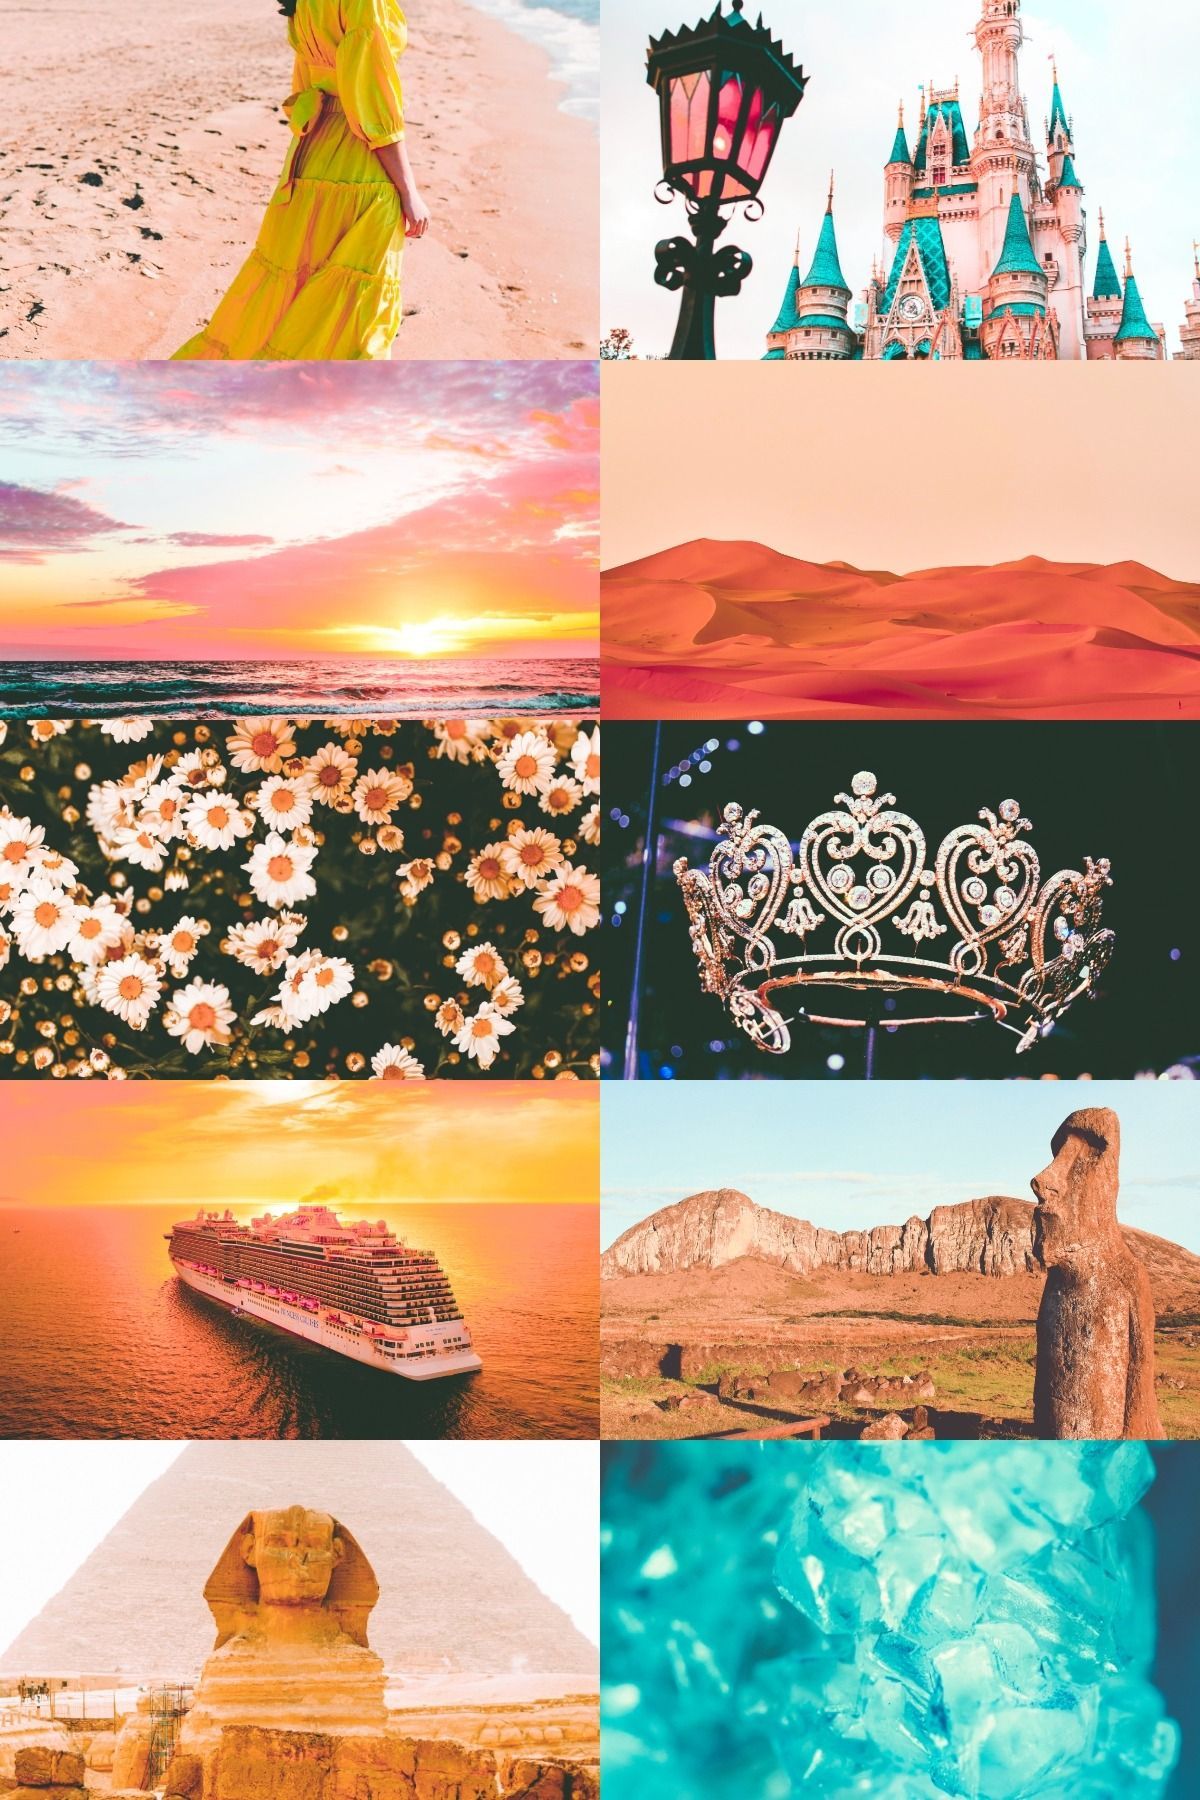 A collage of travel images including a cruise ship, Disney castle, pyramid, and desert. - Collage